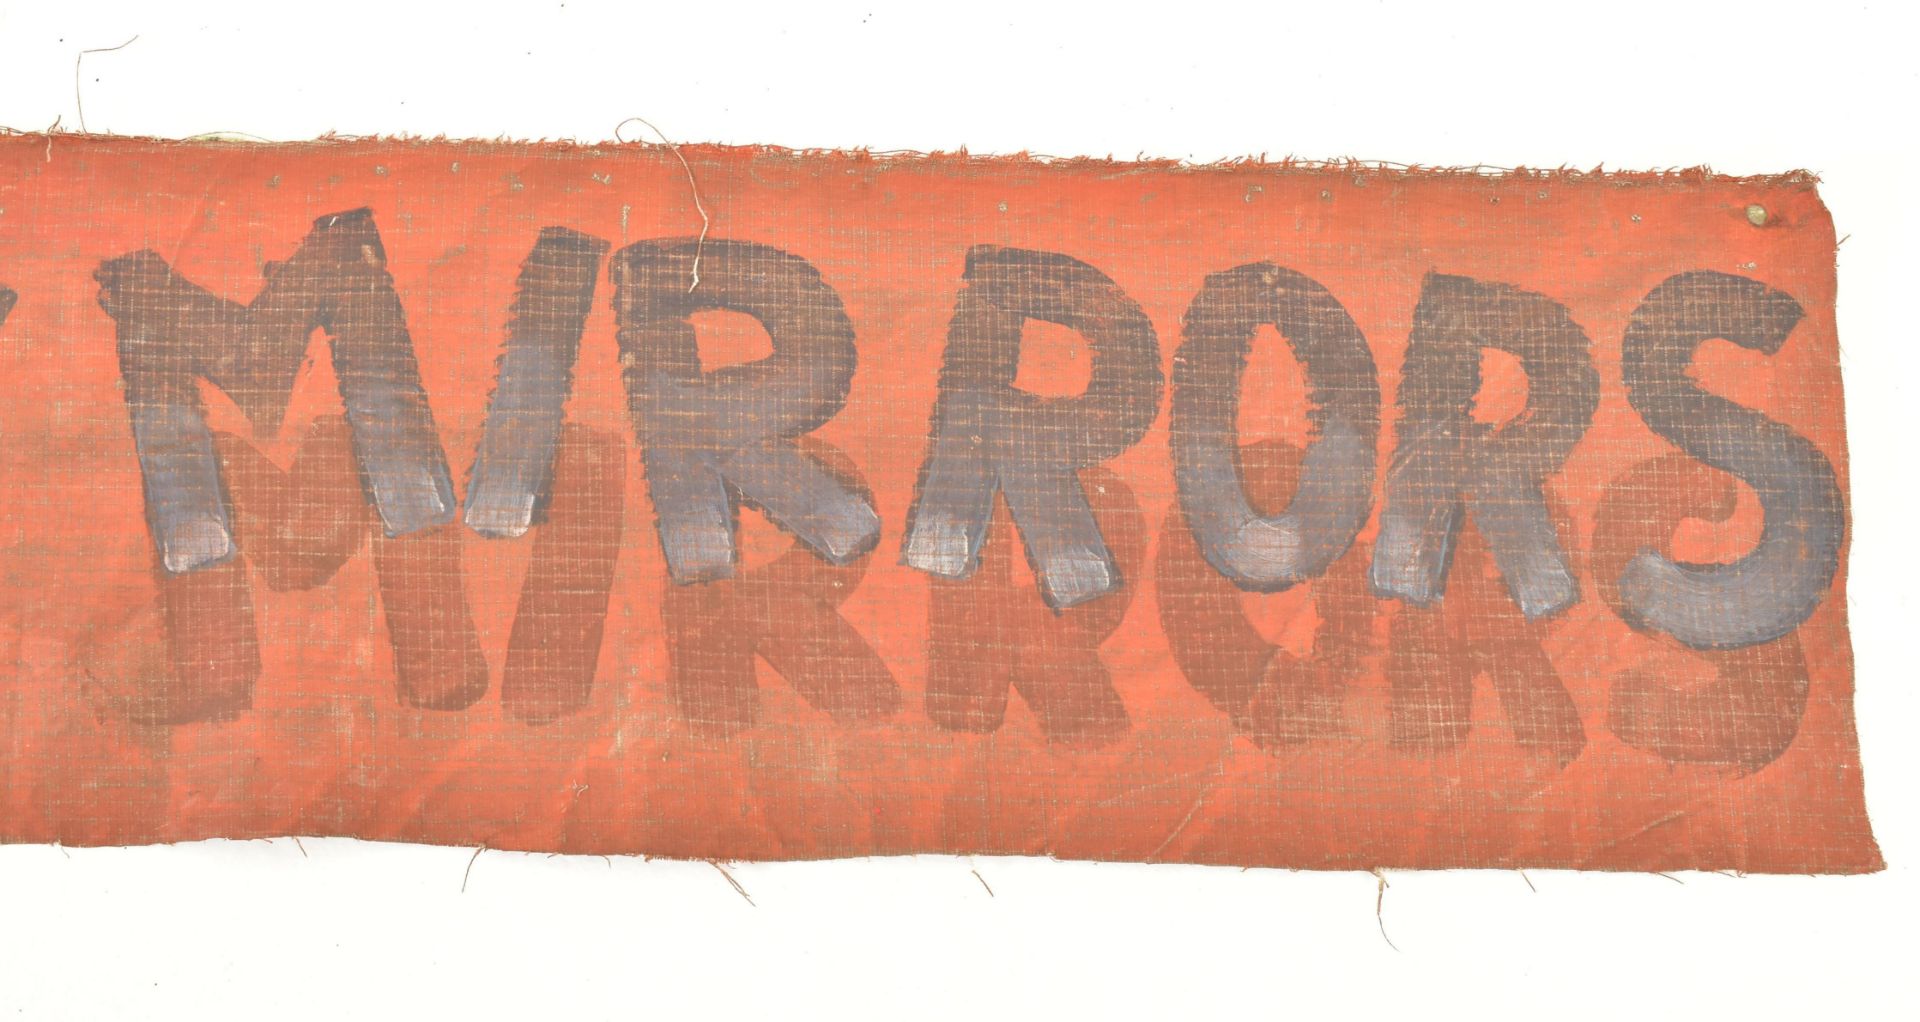 HALL OF MIRROR - FAIRGROUND SIGN PAINTED ON CANVAS - Image 4 of 5